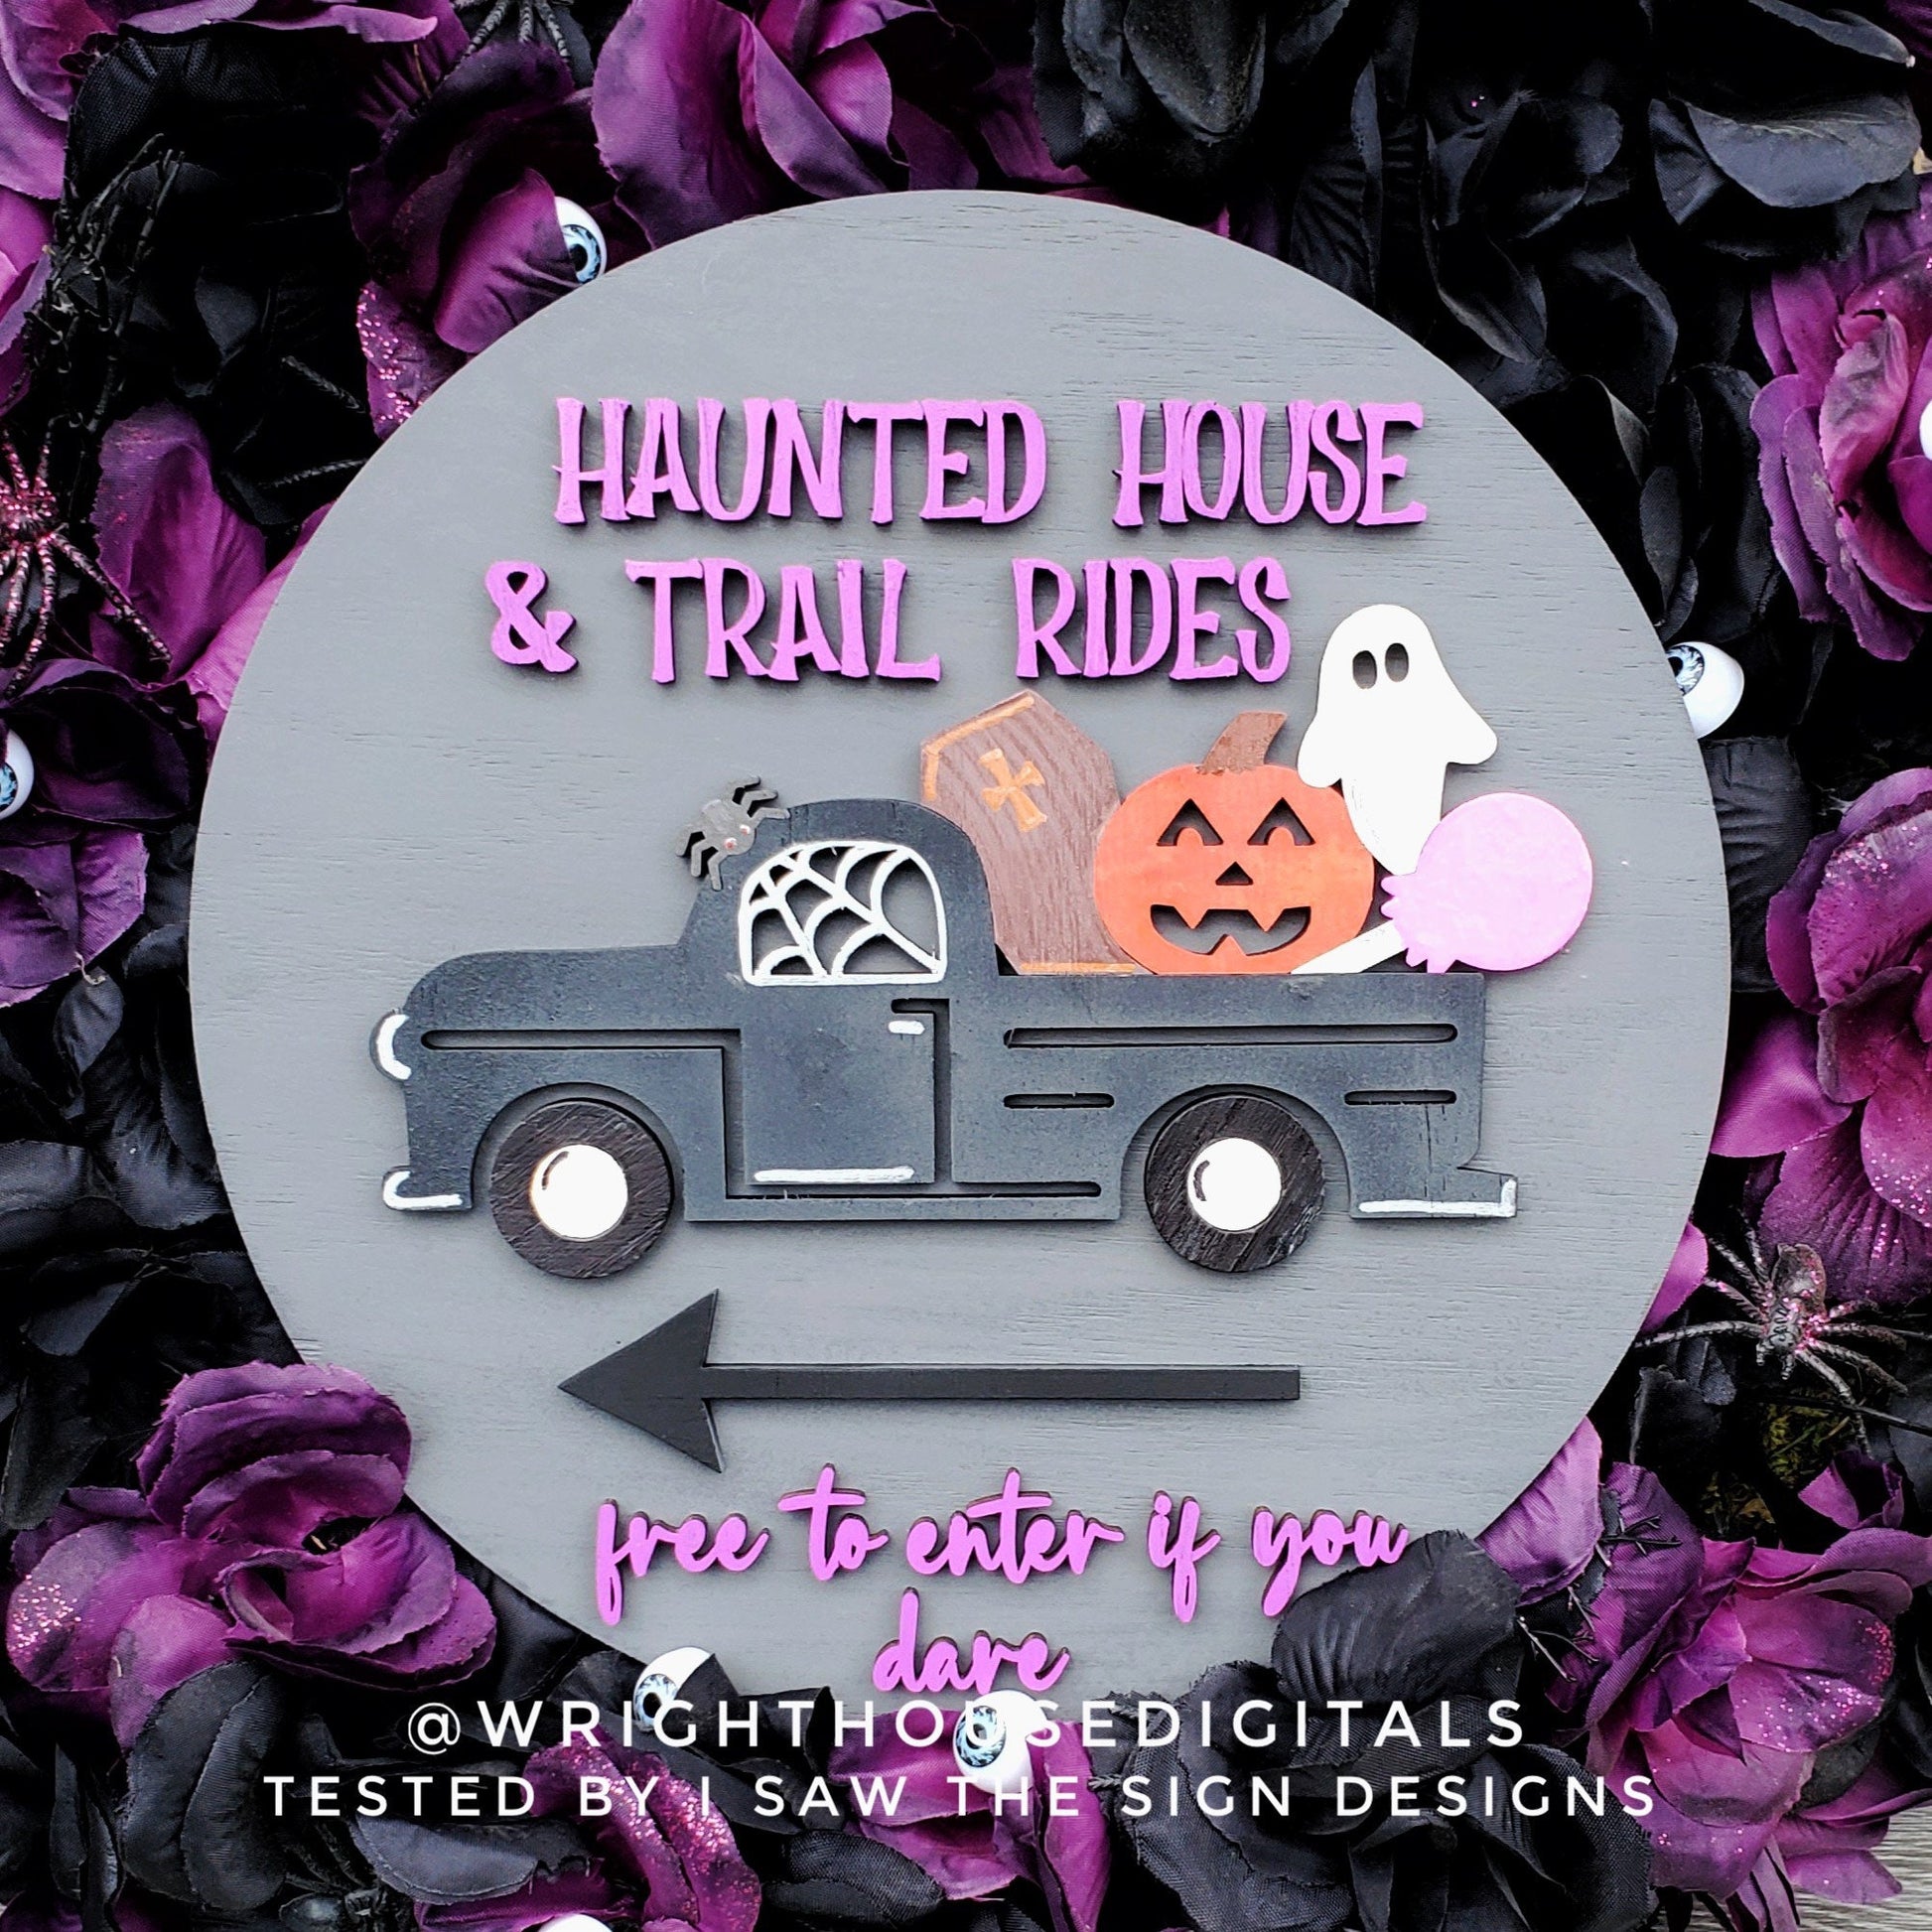 Haunted House and Trail Rides Halloween Round - Seasonal Sign Making and DIY Kits - Cut File For Glowforge Lasers - Digital SVG File